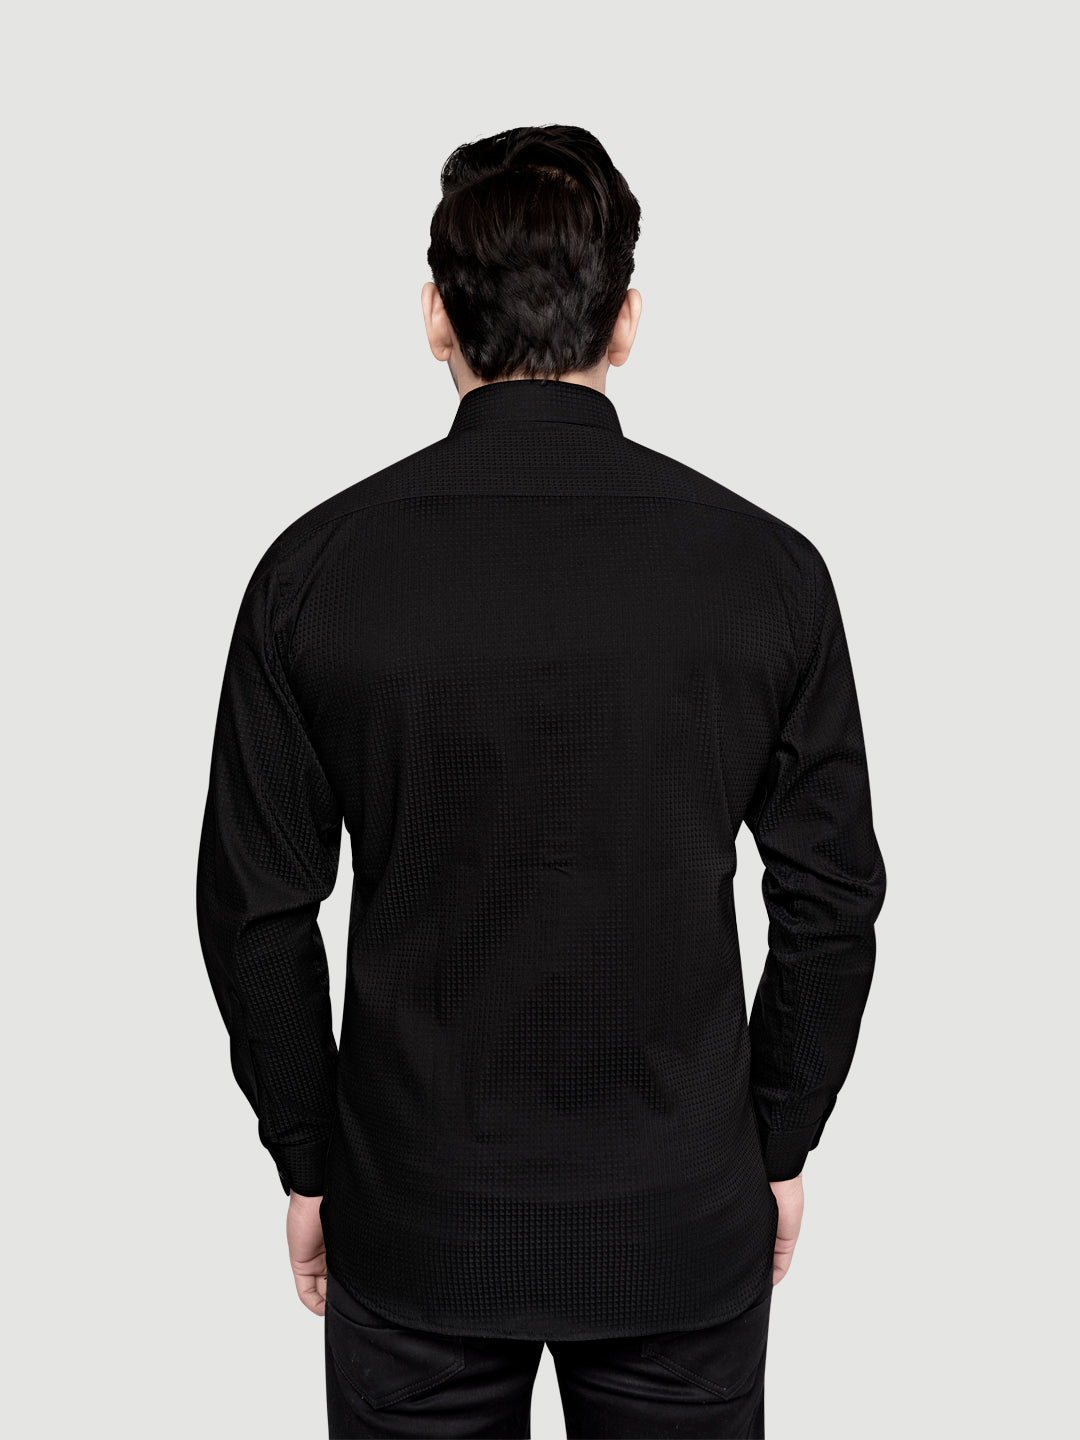 Black and white shirts Men's Designer Shirt with textured dobby fabric & Patch Black